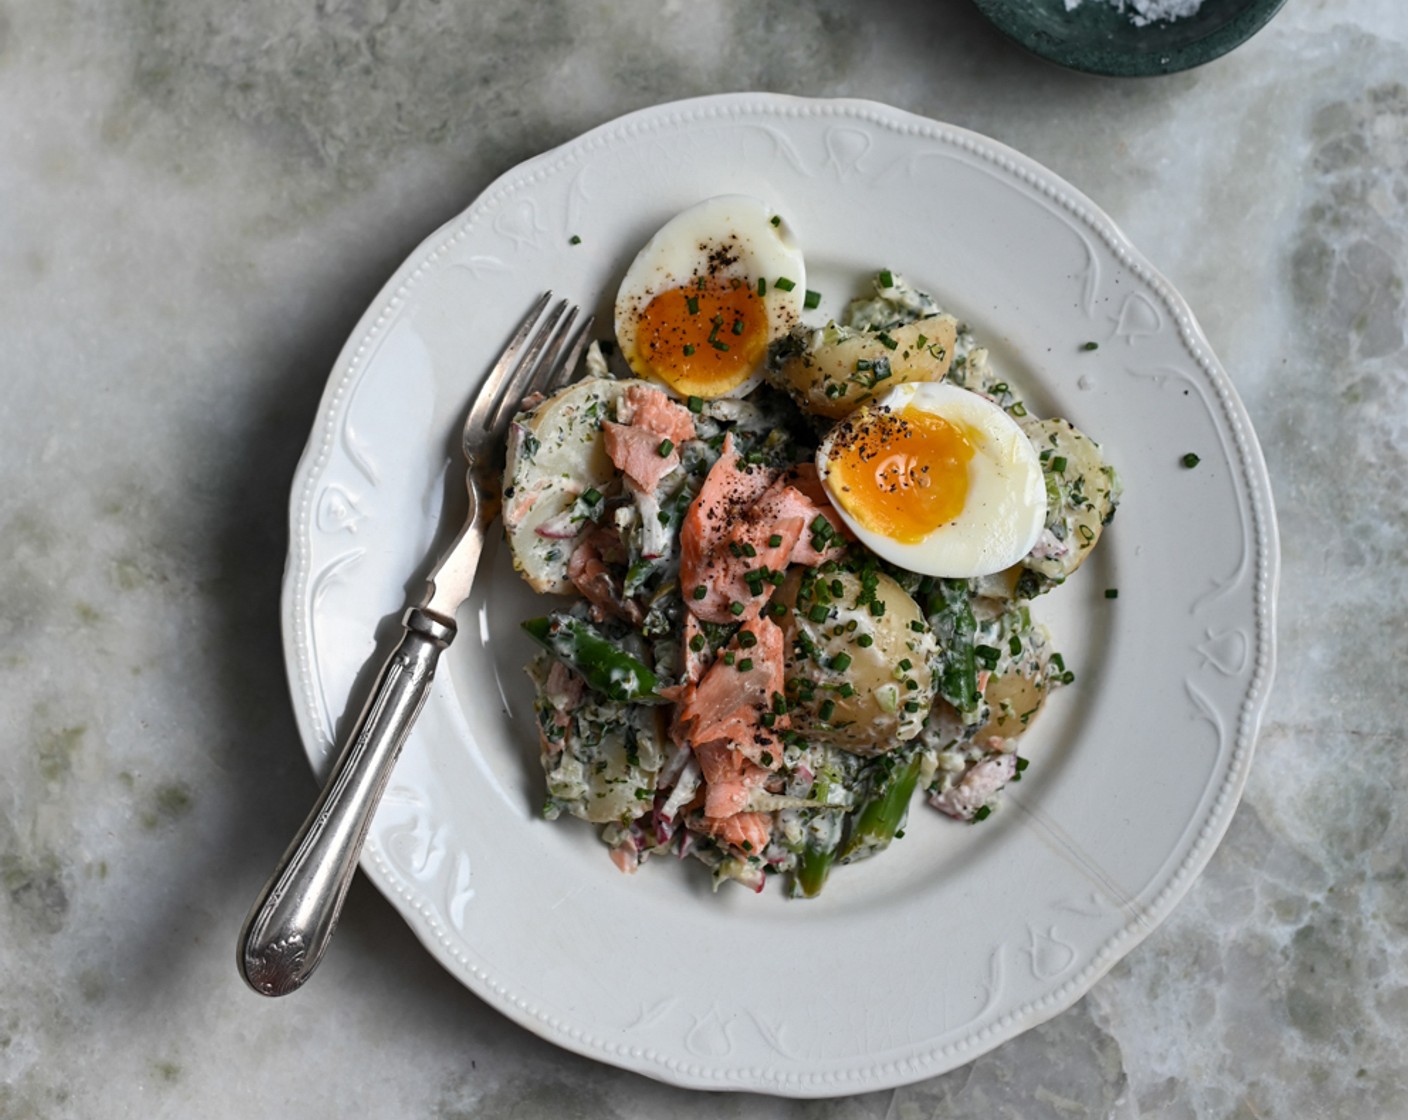 step 11 Scatter a few extra chopped chives over the top of each serving and top with two halves of the soft-boiled eggs. Add a final scatter of Maldon salt over the eggs and serve the trout salad. Enjoy!